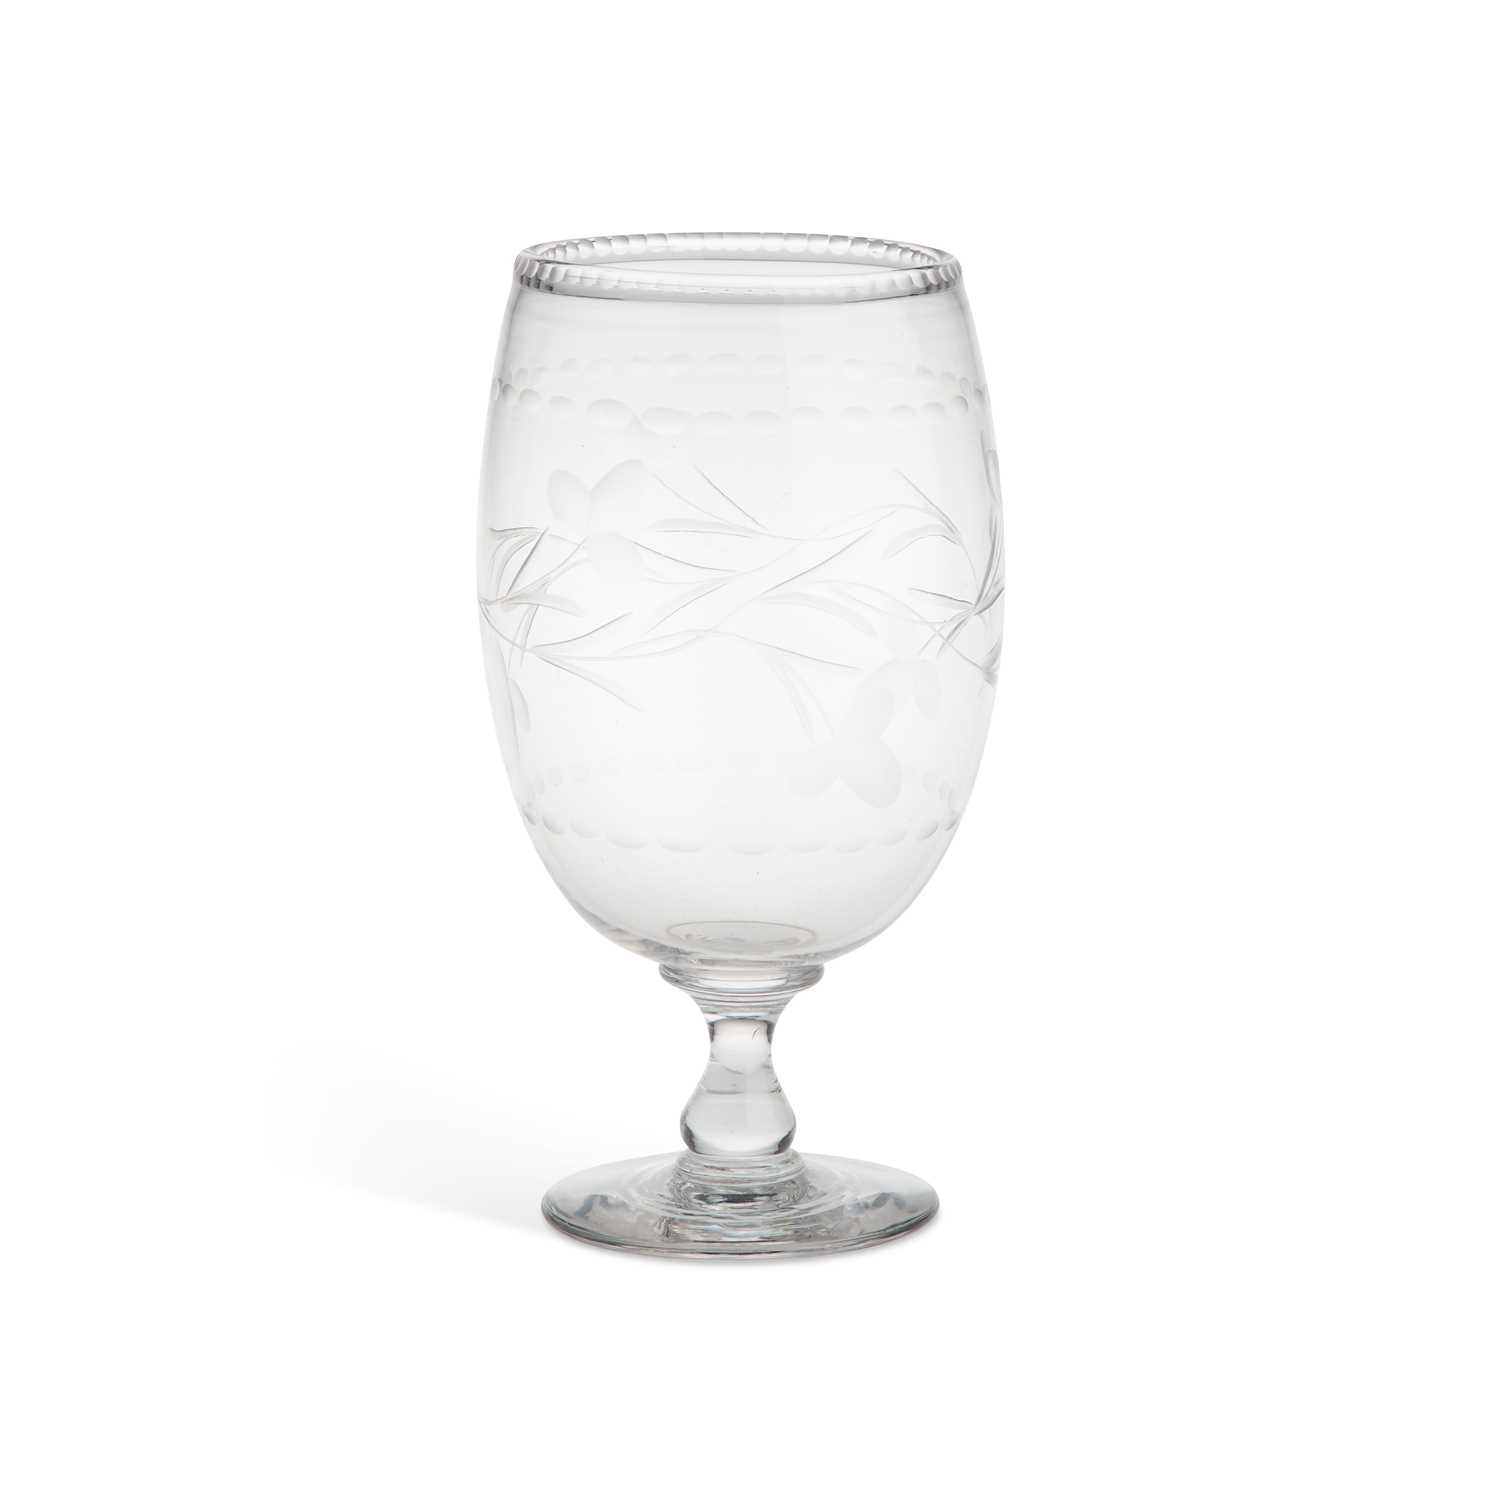 A GLASS CELERY VASE, LATE 19TH/EARLY 20TH CENTURY